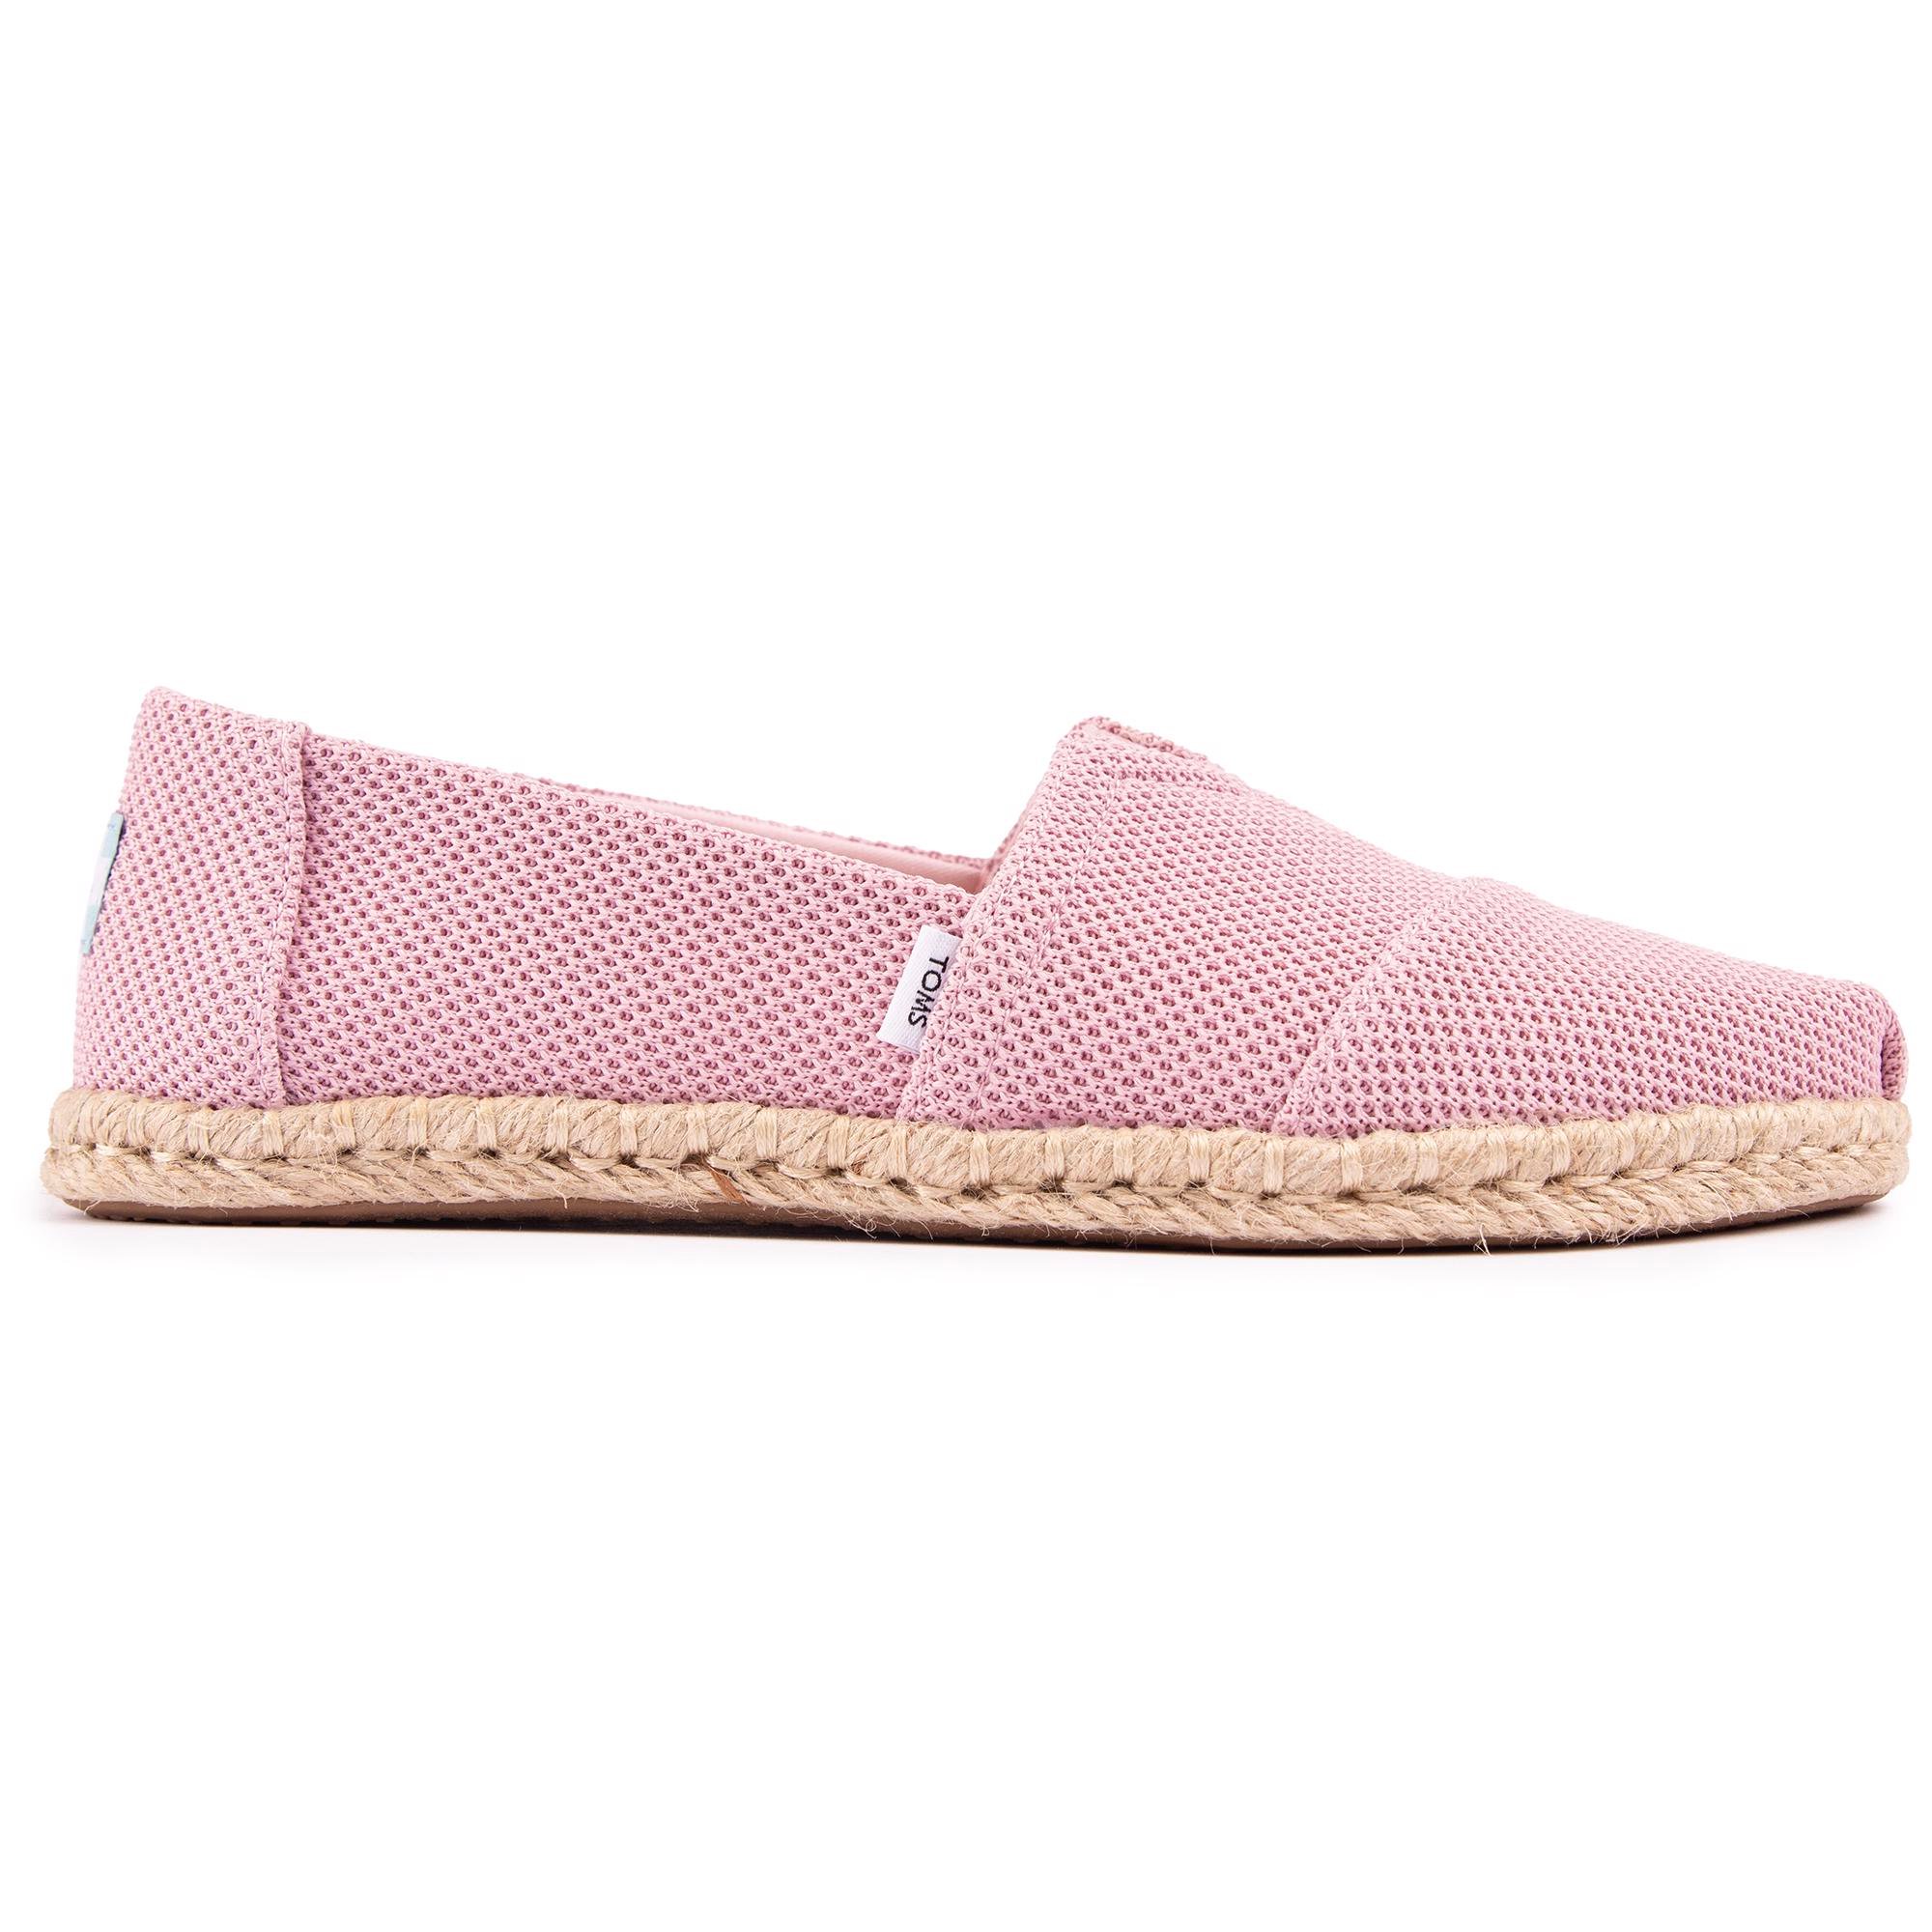 Cheap Womens Toms Shoes | Soletrader Outlet